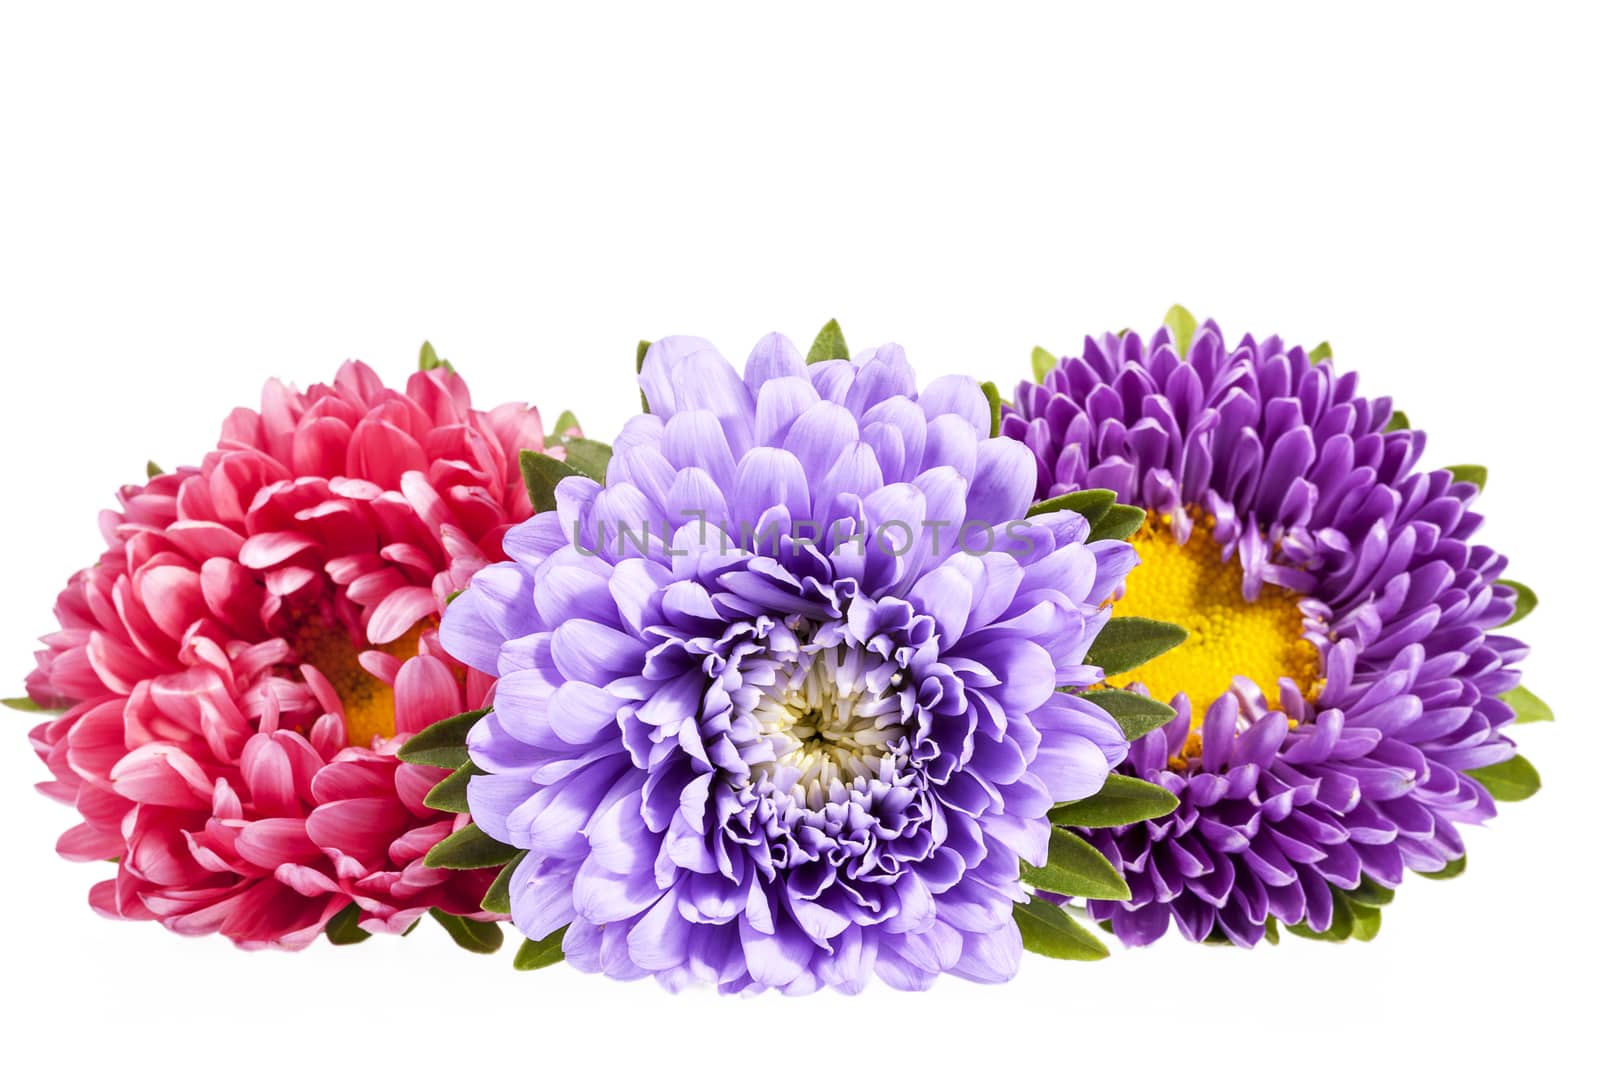 Aster flowers isolated on white background . by mychadre77